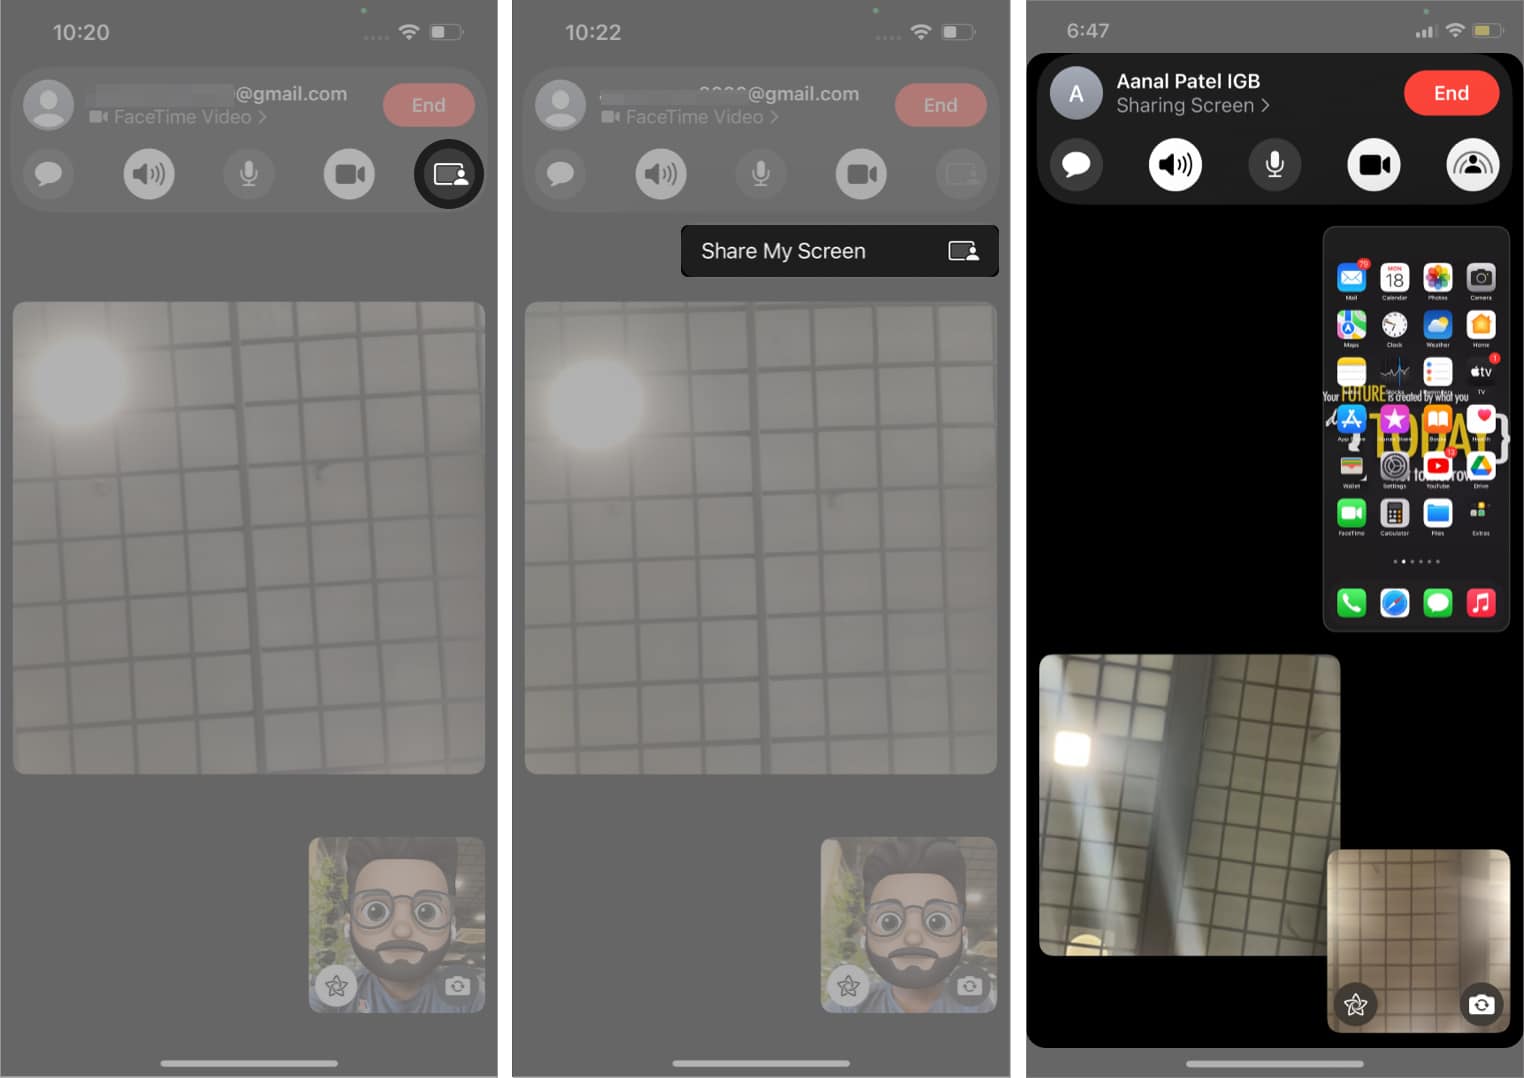 How to share screen on FaceTime using iPhone, iPad, and Mac